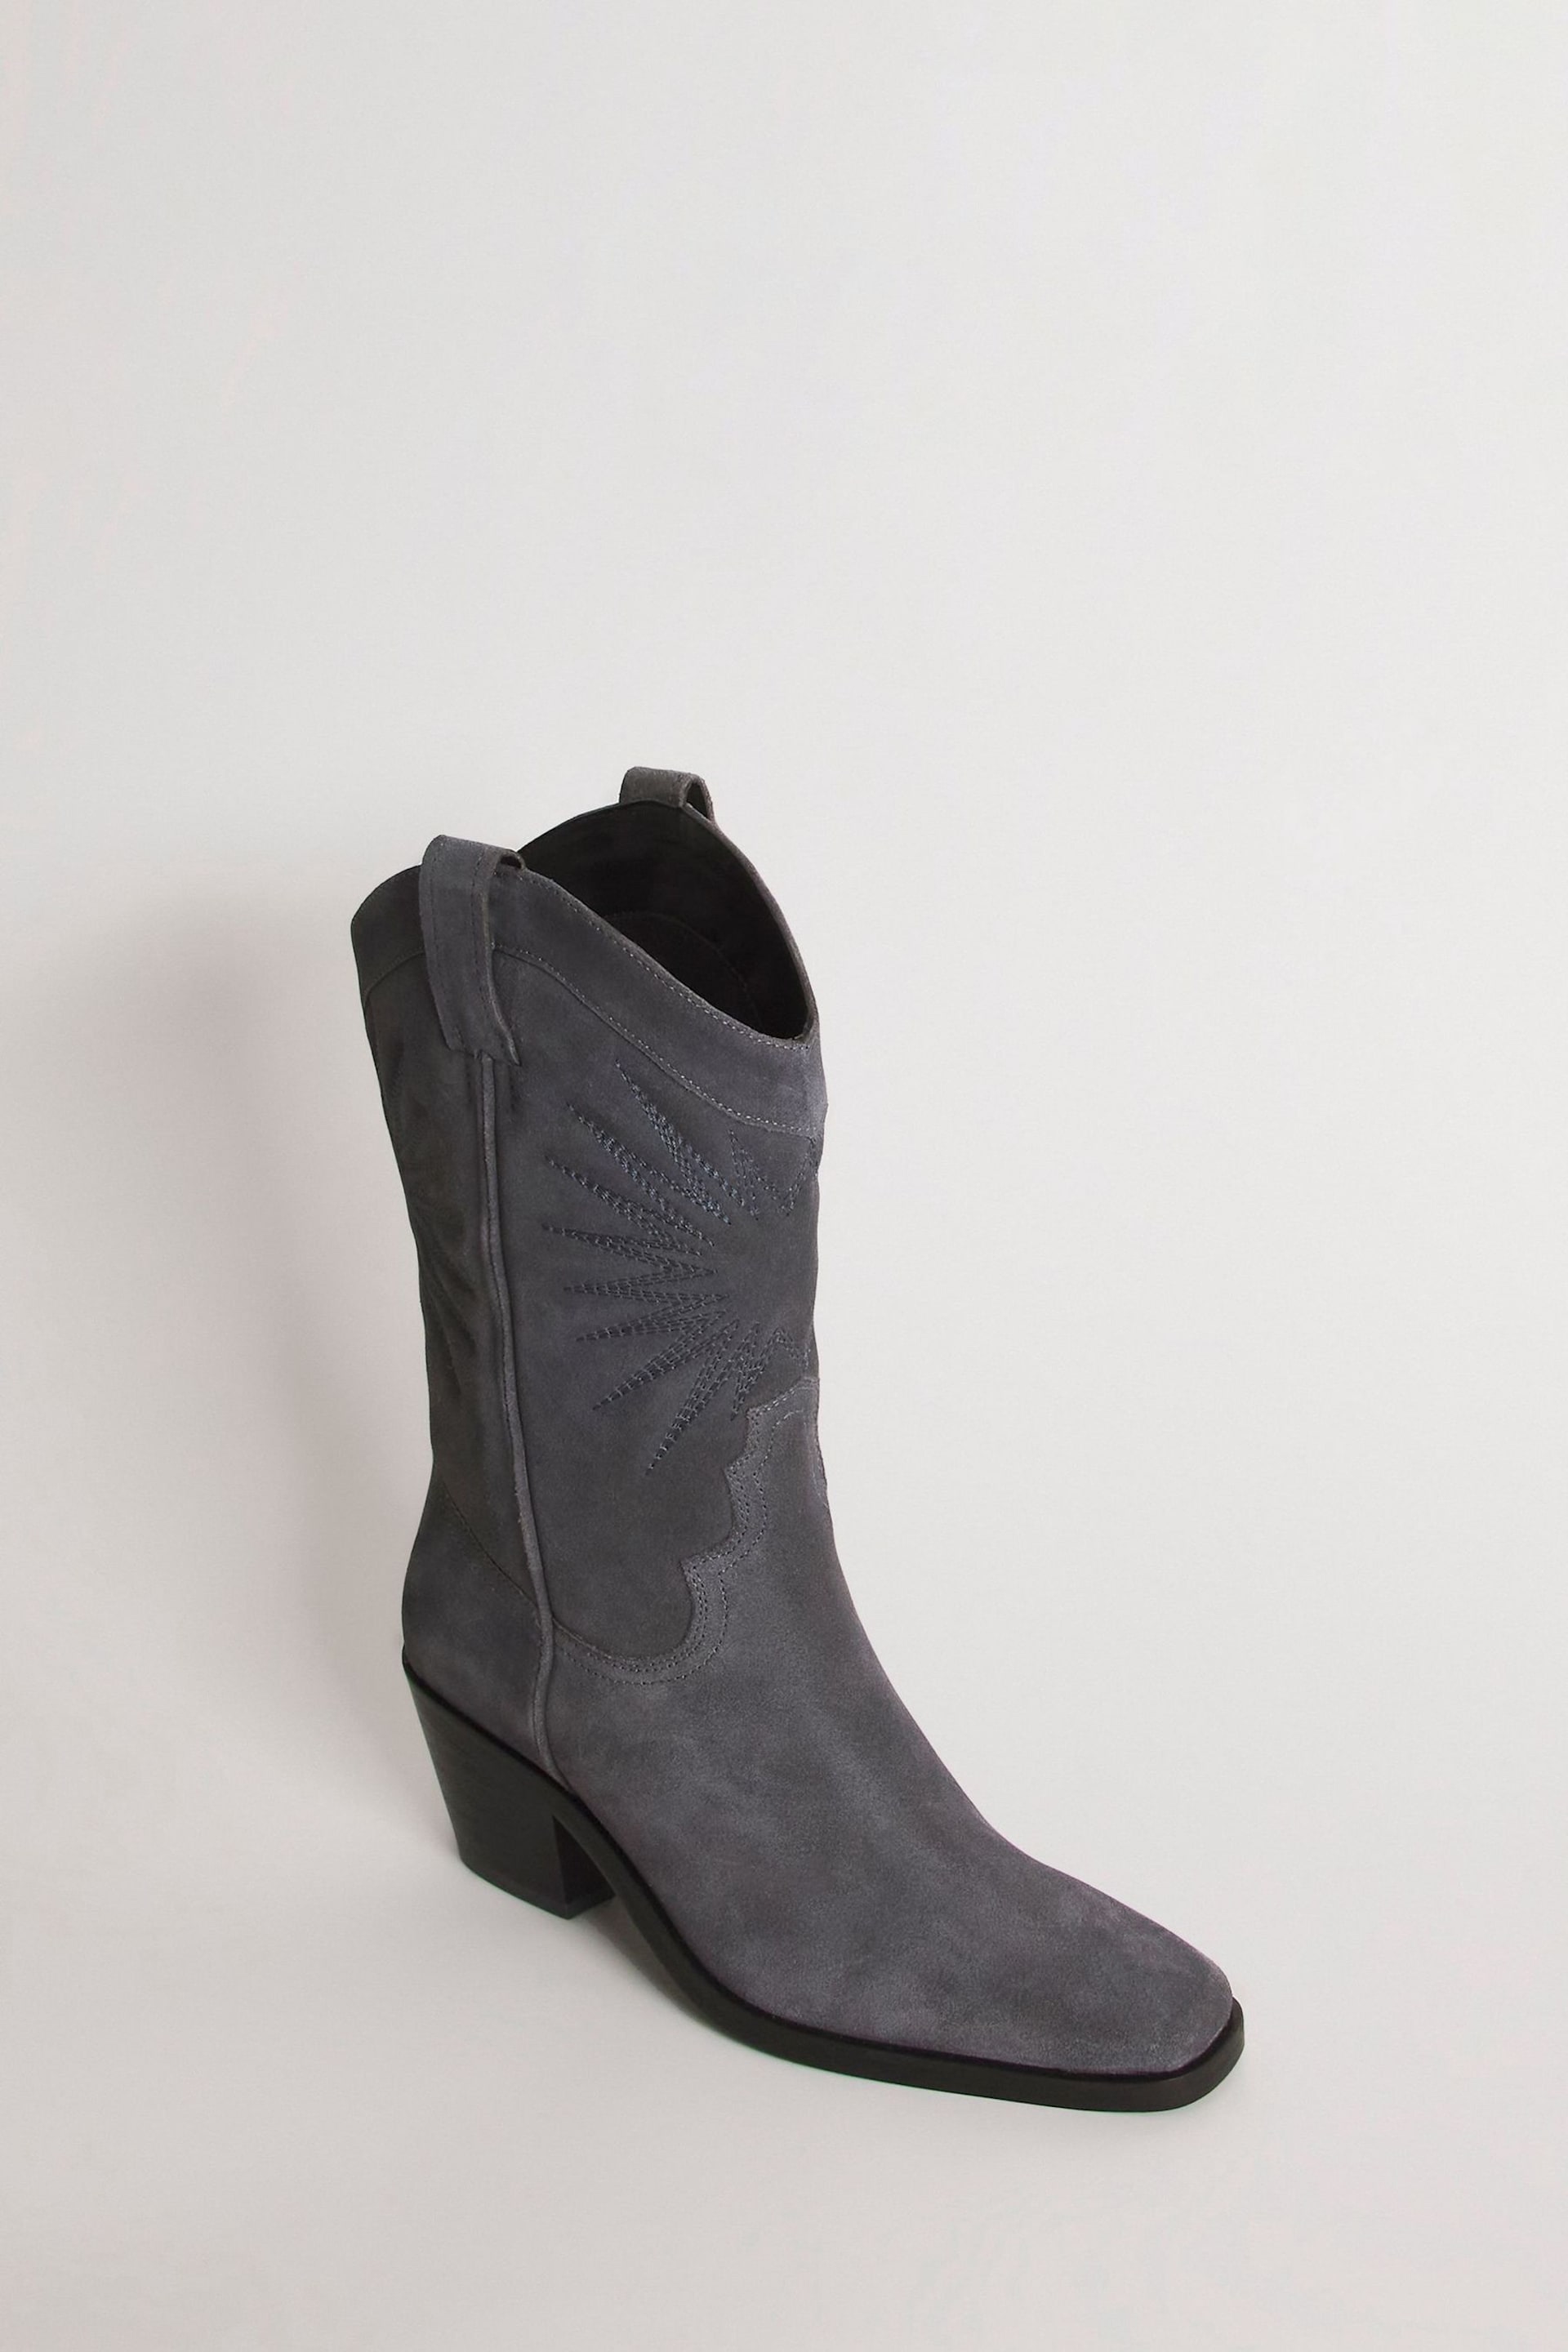 Simply Be Grey Suede Embroidered Western Calf Boots in Wide Fit Standard Calf - Image 2 of 3